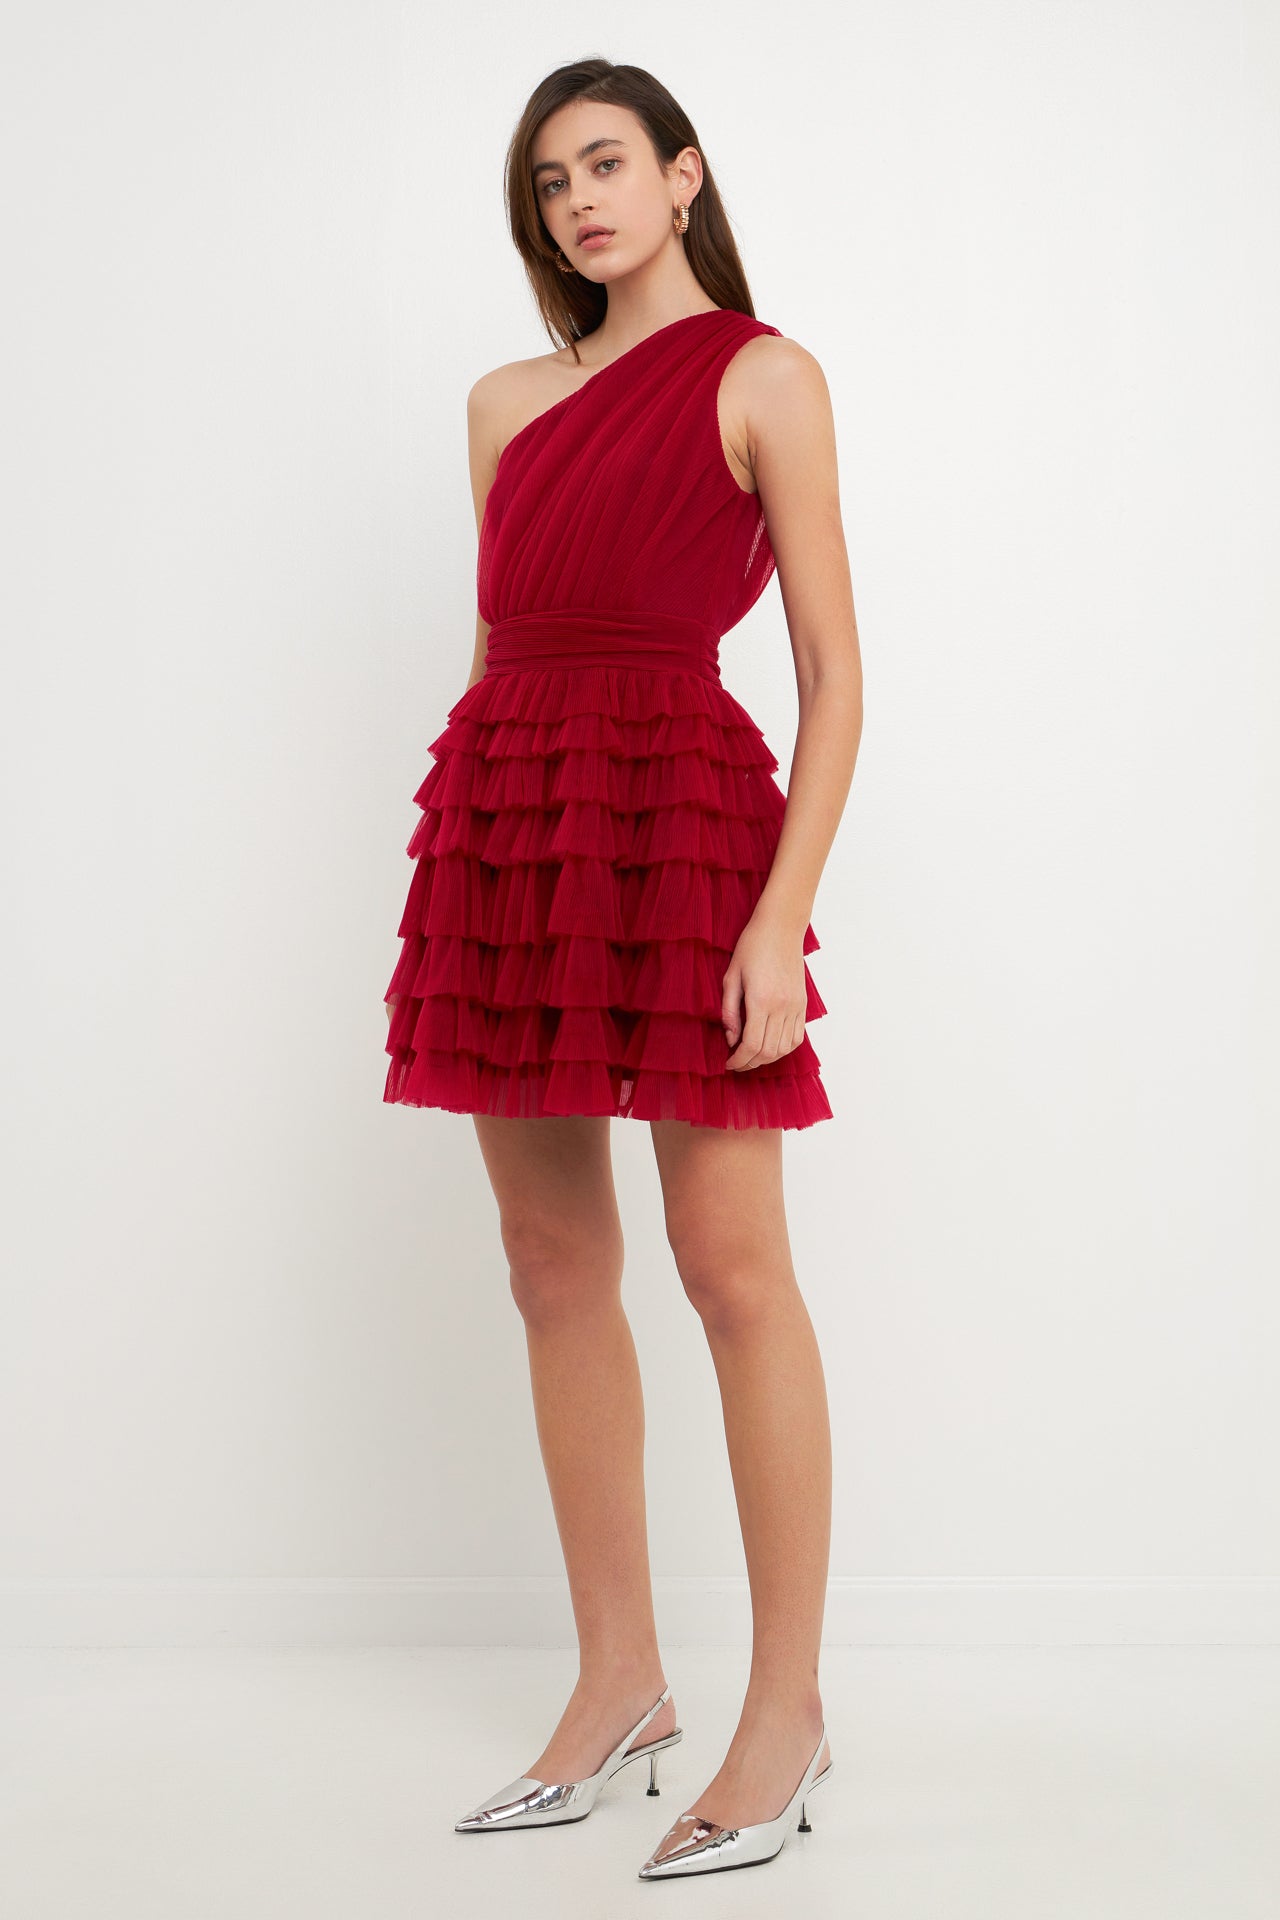 ENDLESS ROSE - Tiered Tulle Mini Dress - DRESSES available at Objectrare